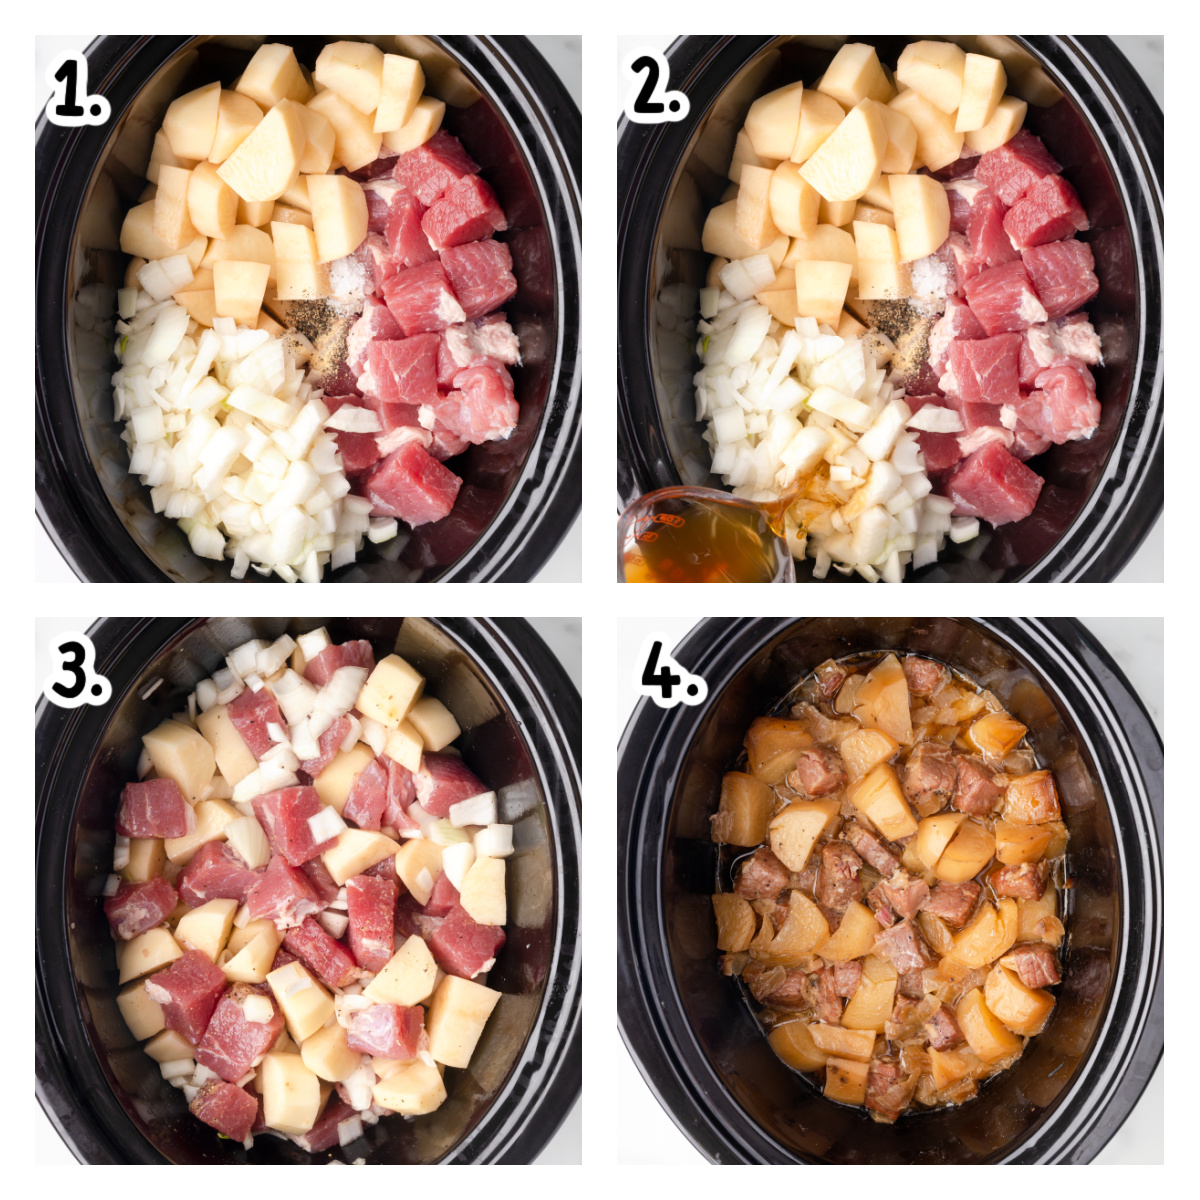 Four images showing how to make corned beef hash in a crockpot.